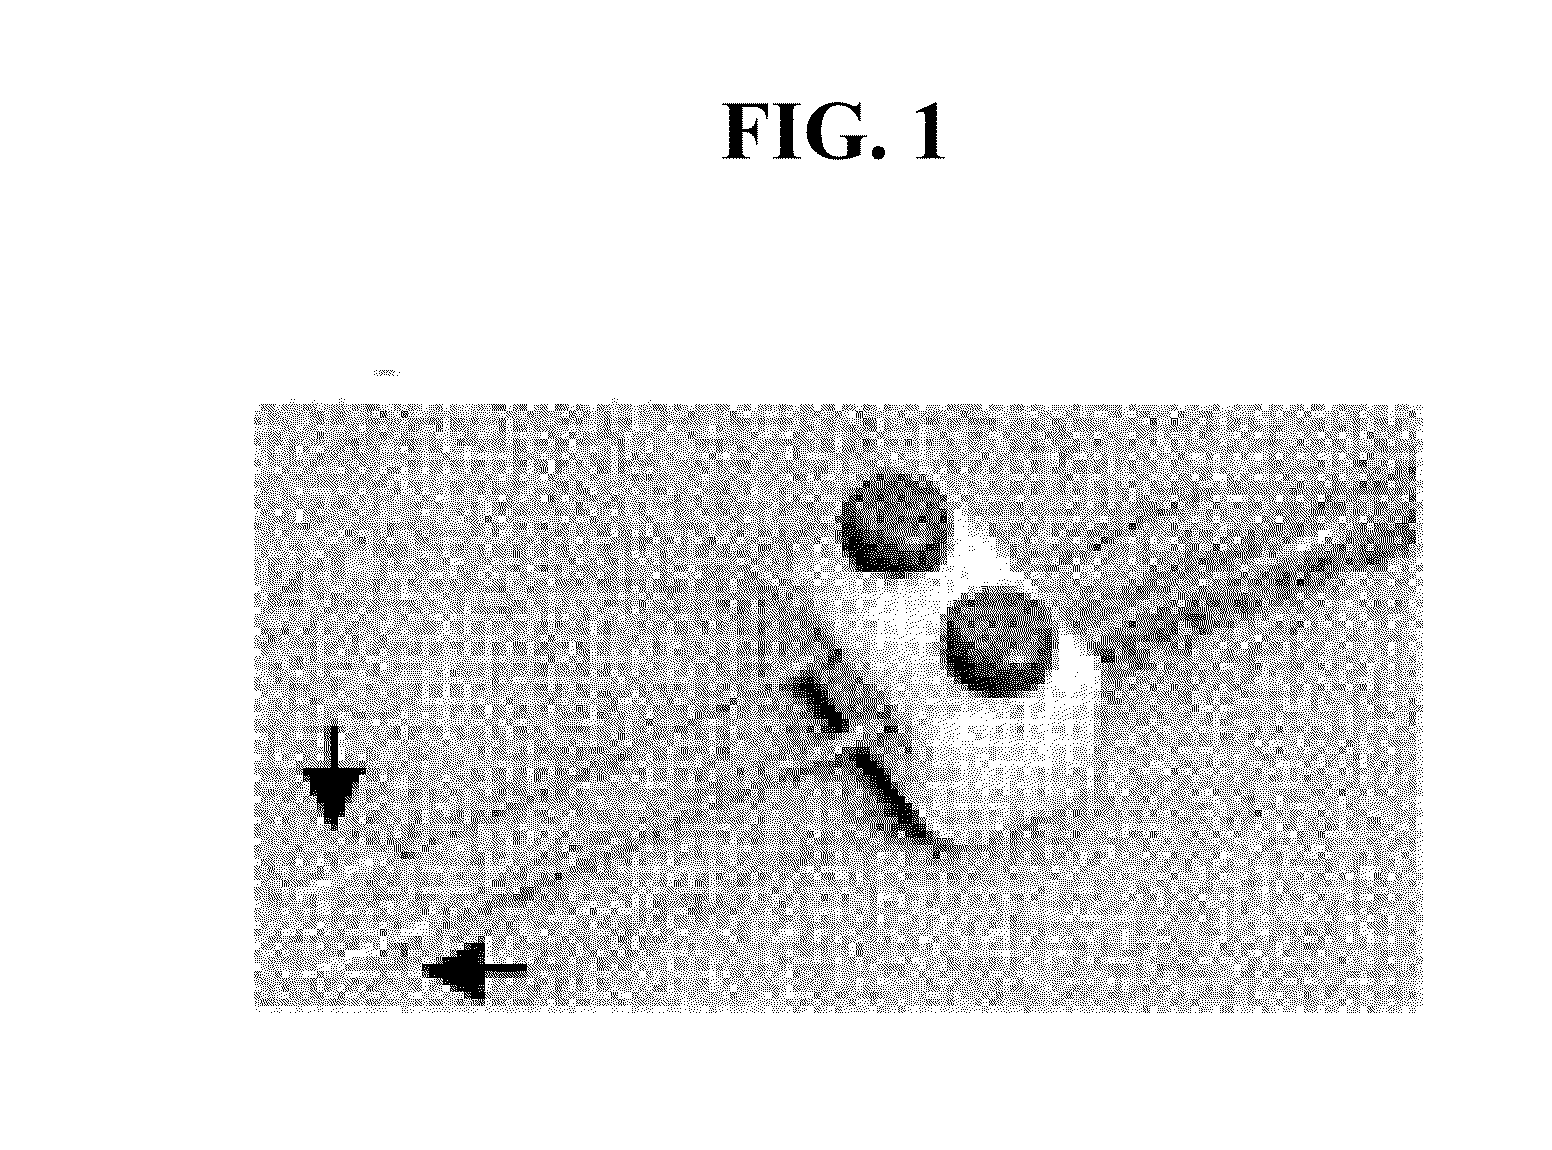 Devices for material delivery, electroporation, sonoporation, and/or monitoring electrophysiological activity